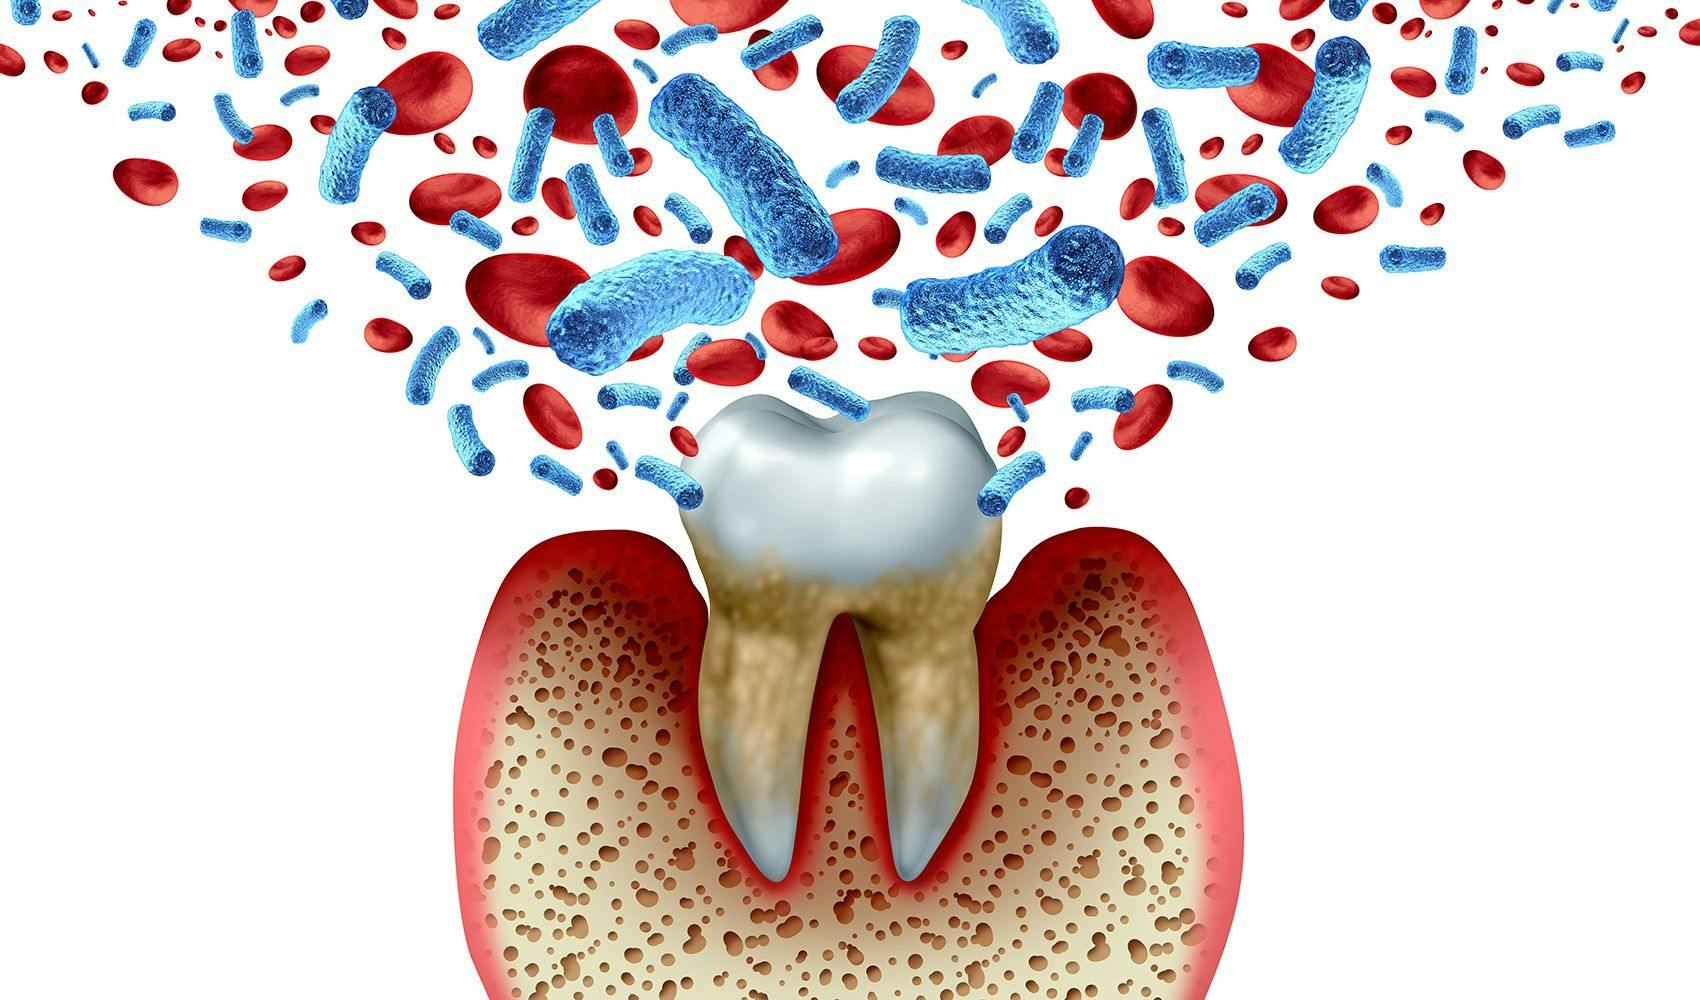 3D illustration of a tooth surrounded by bacteria | Image Source: © freshidea / stock.adobe.com